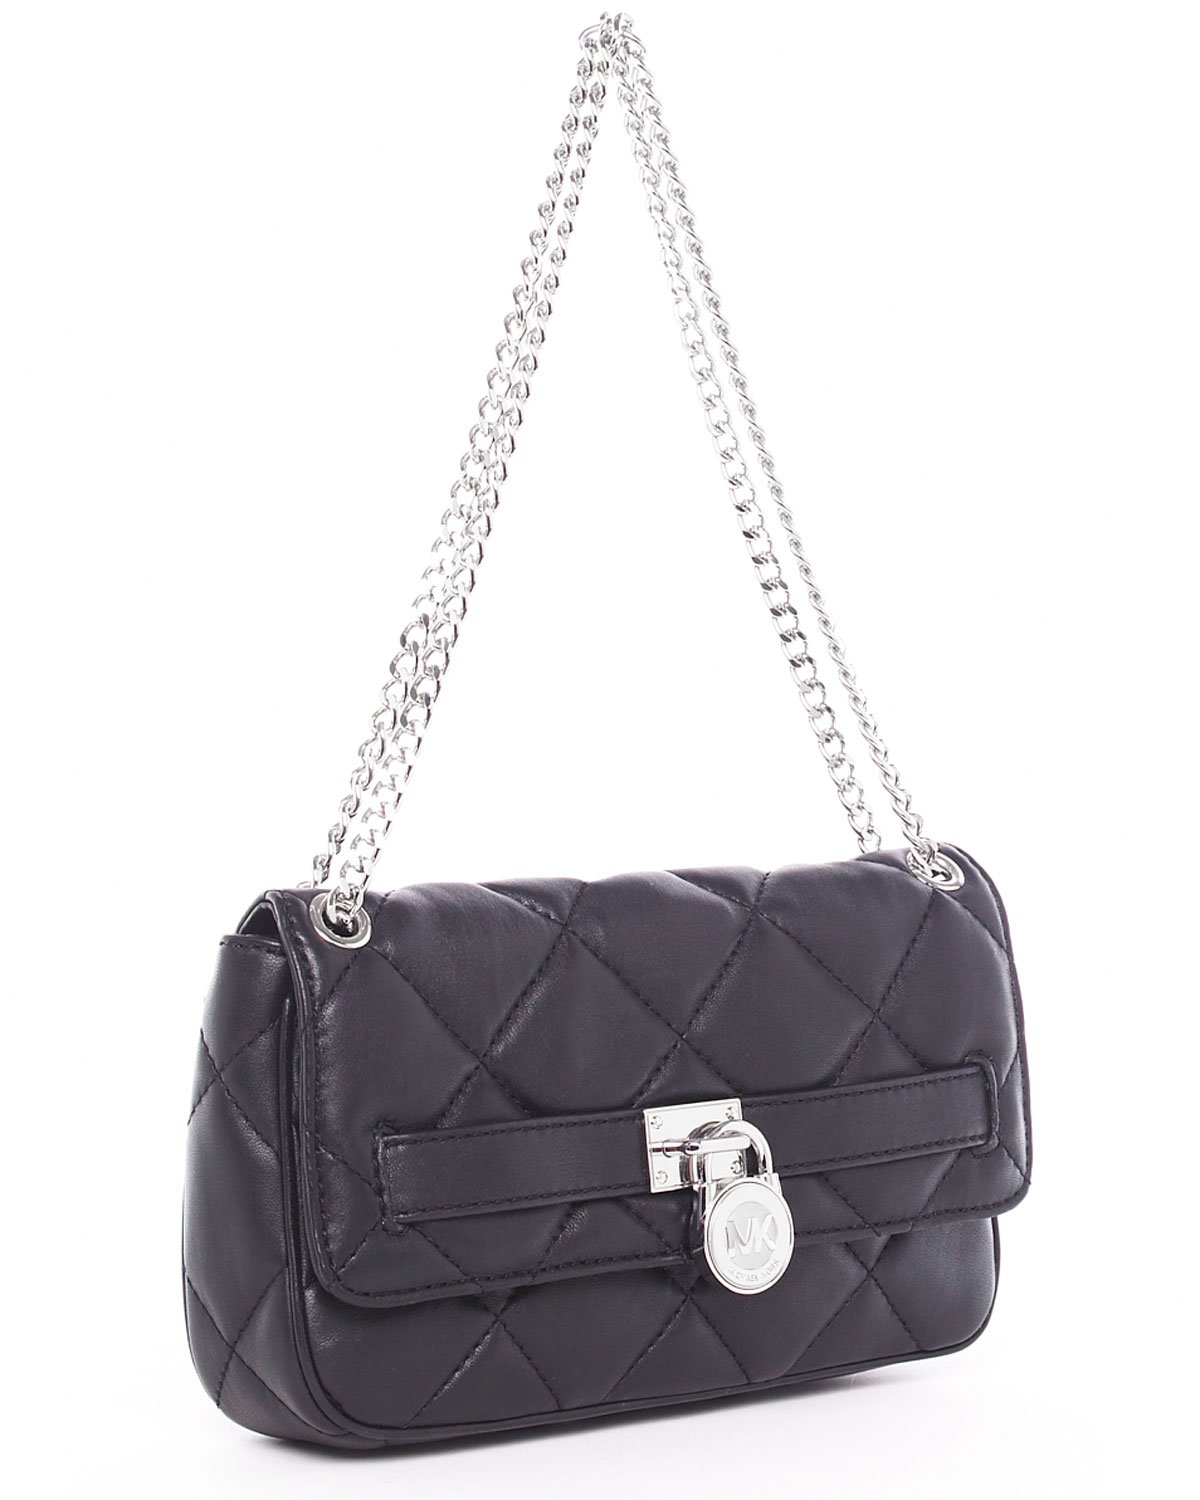 MICHAEL Michael Kors Small Quilted Hamilton Shoulder Bag in Black - Lyst